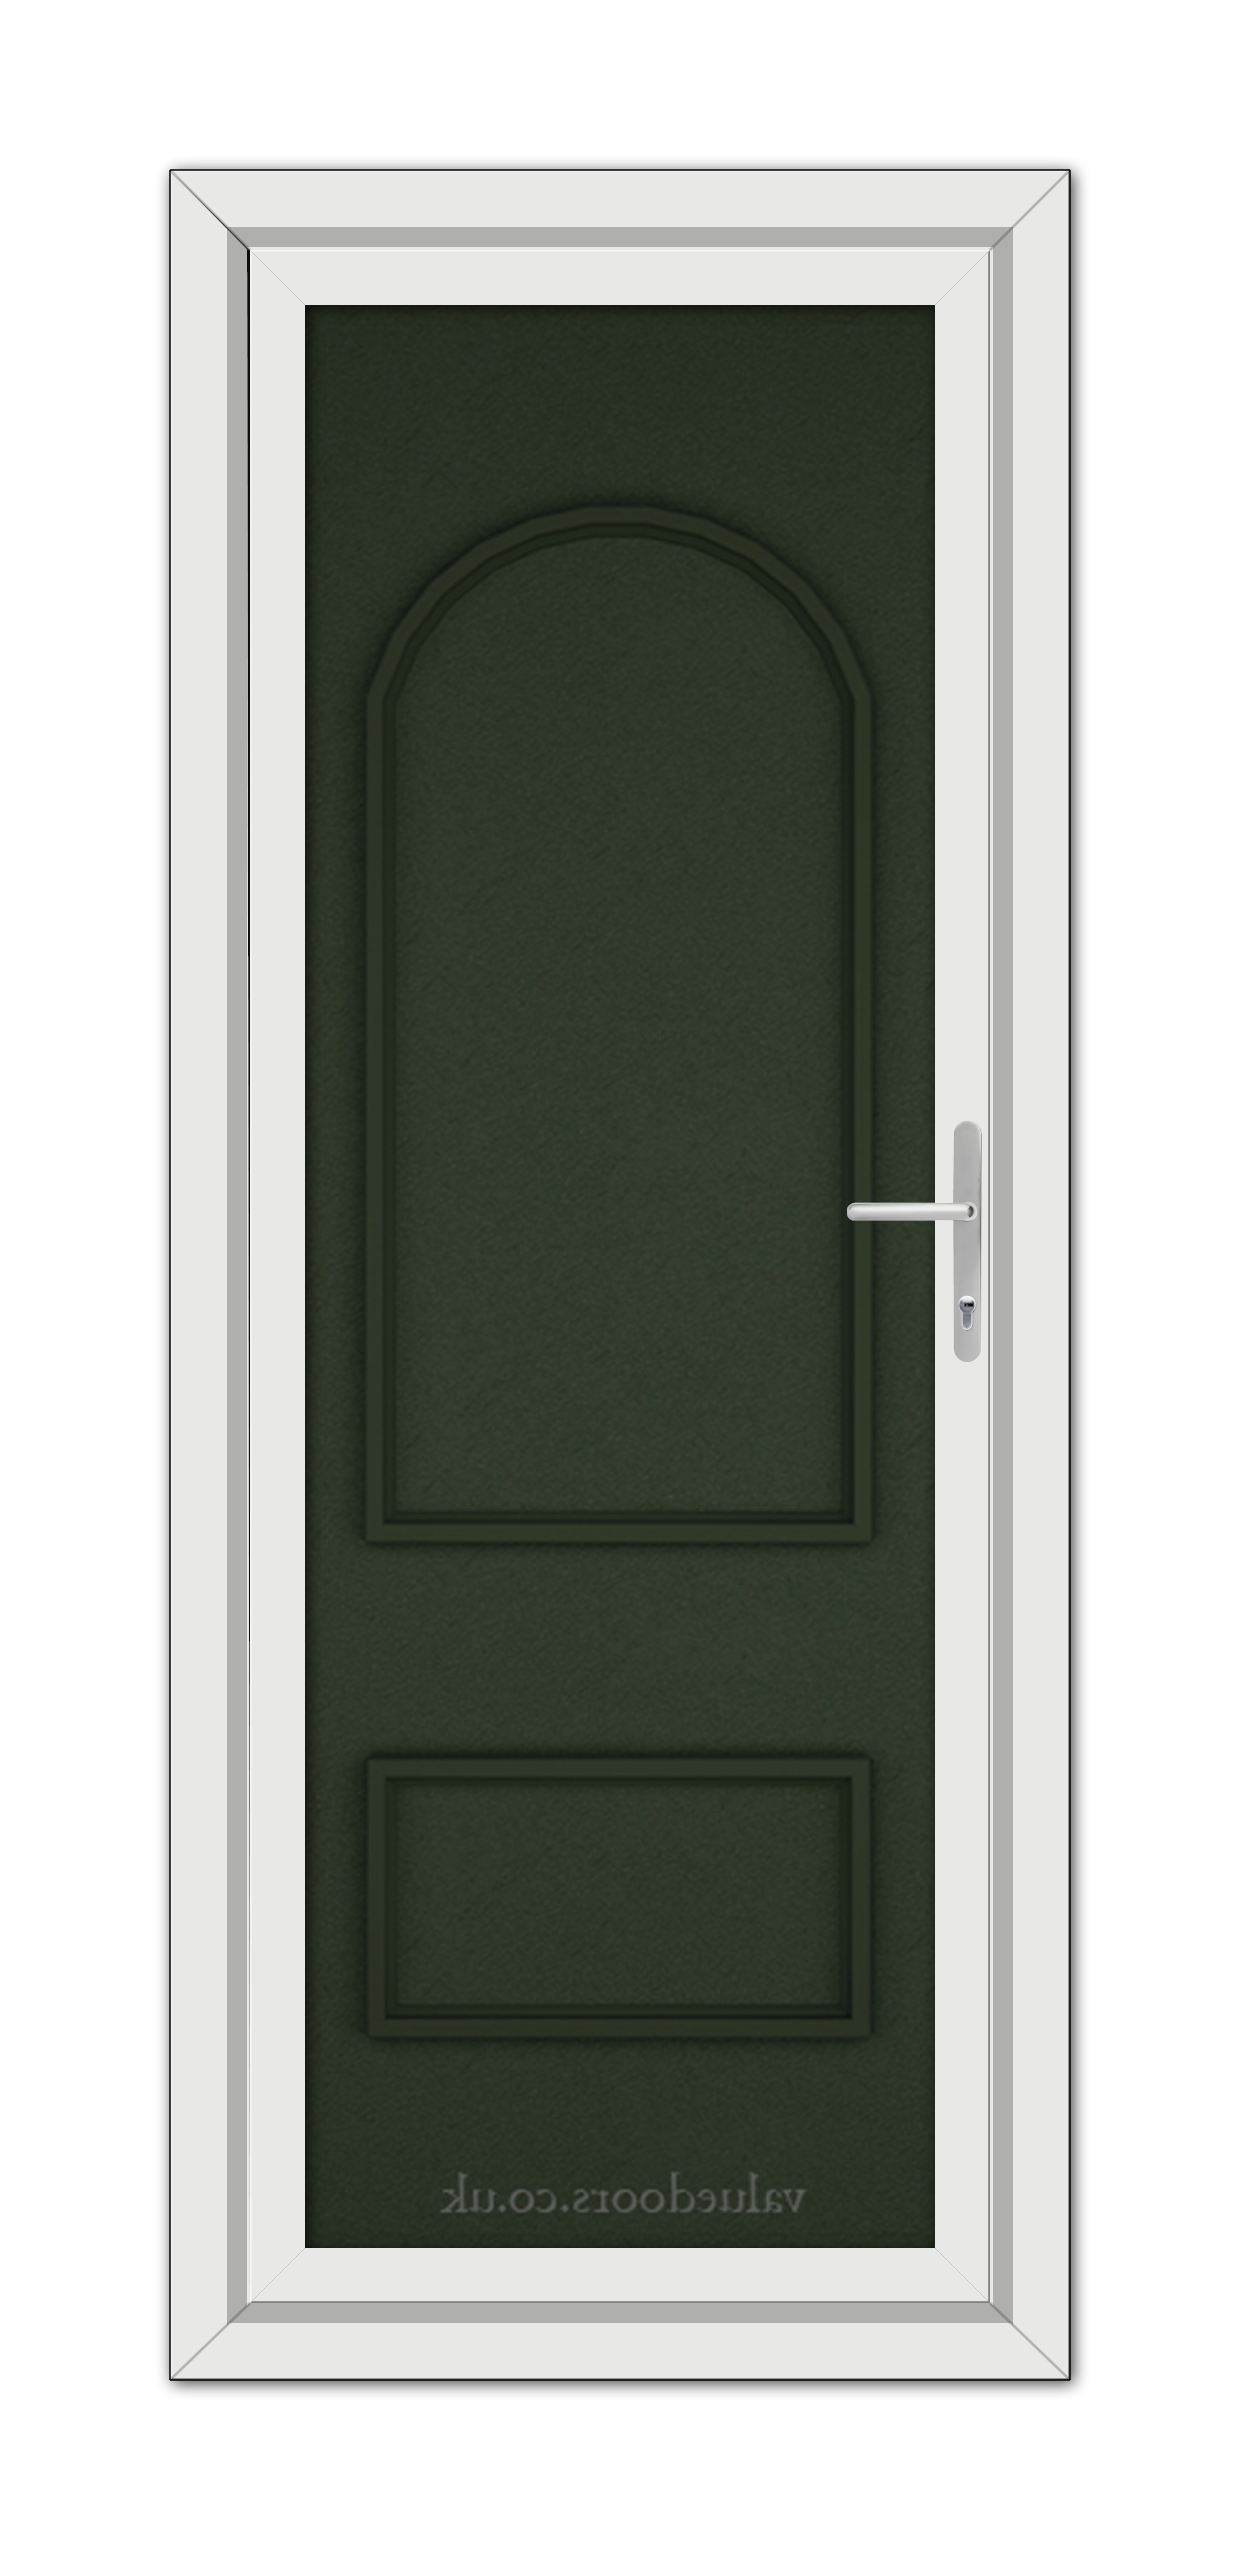 A vertical image of a Green Rockingham Solid uPVC Door within a white frame, featuring a silver handle on the right side.